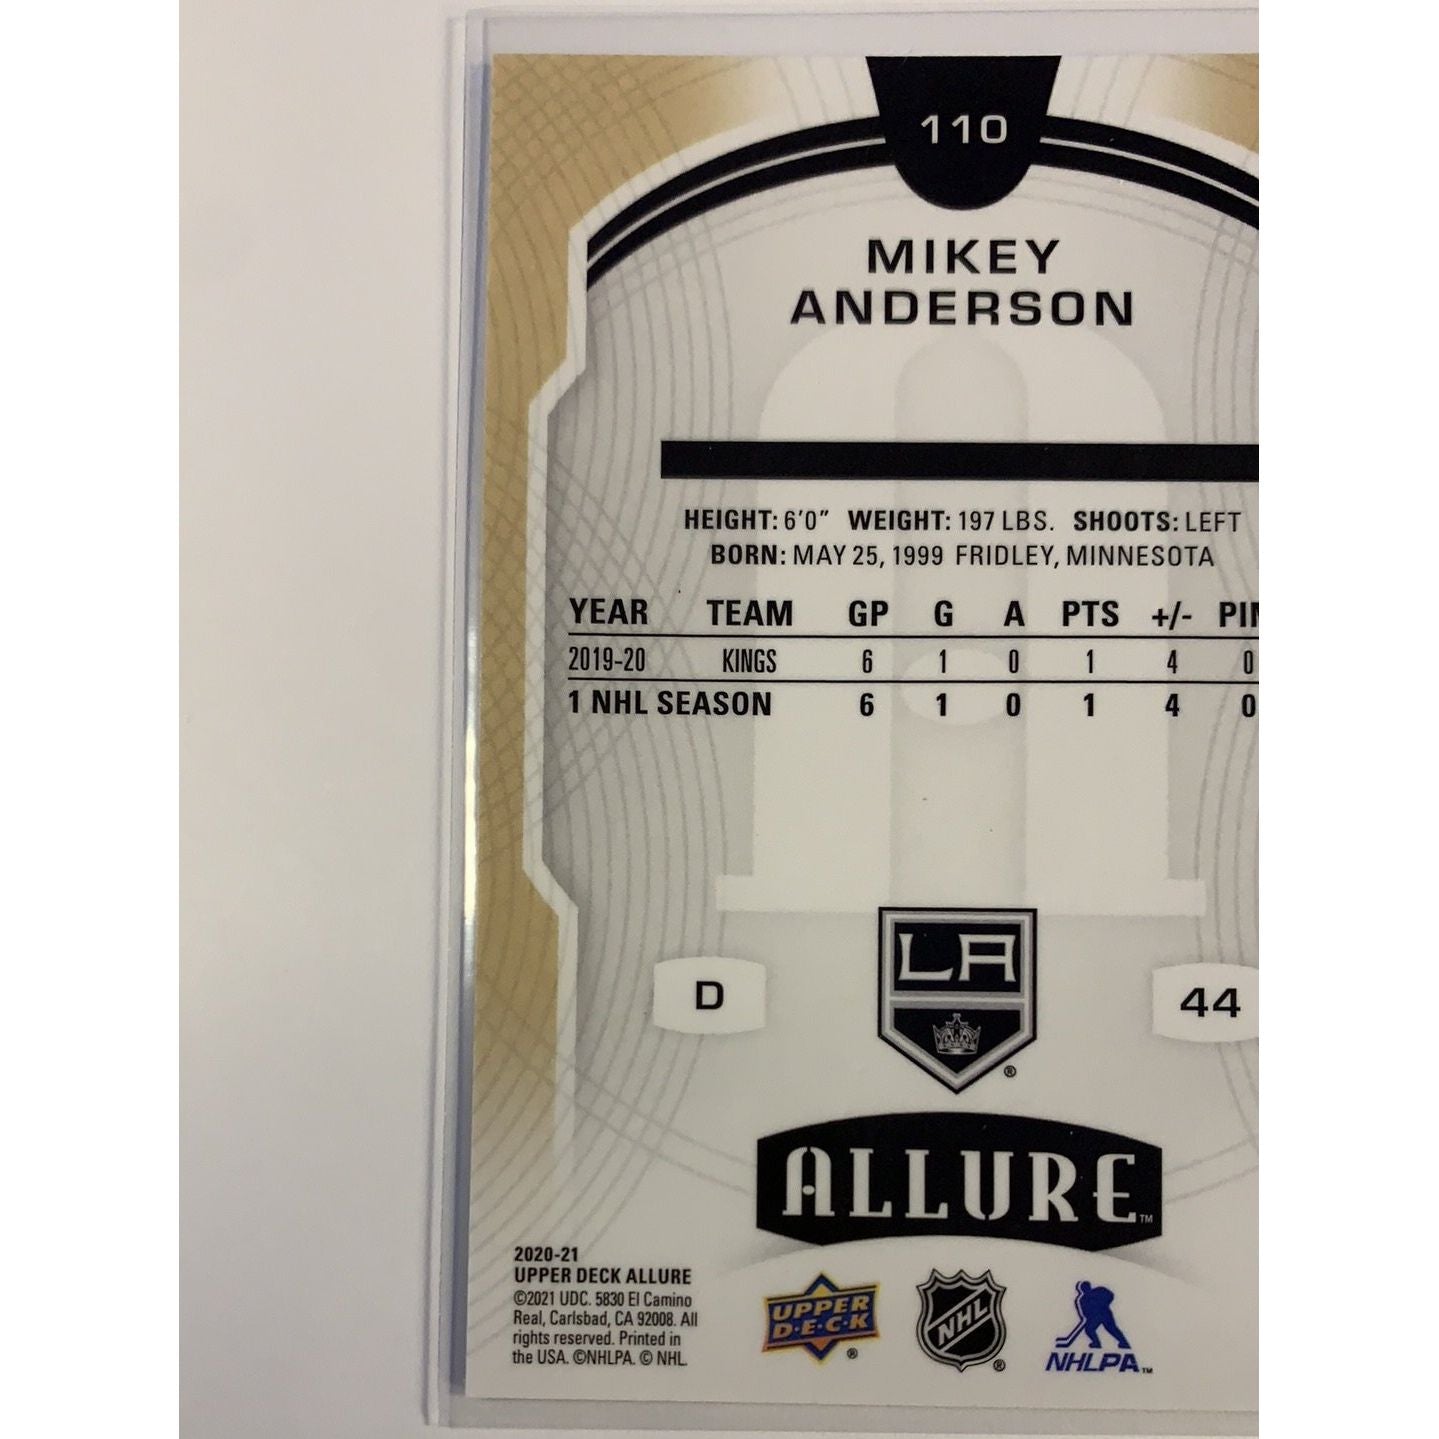  2020-21 Allure Mikey Anderson Rookie Card  Local Legends Cards & Collectibles